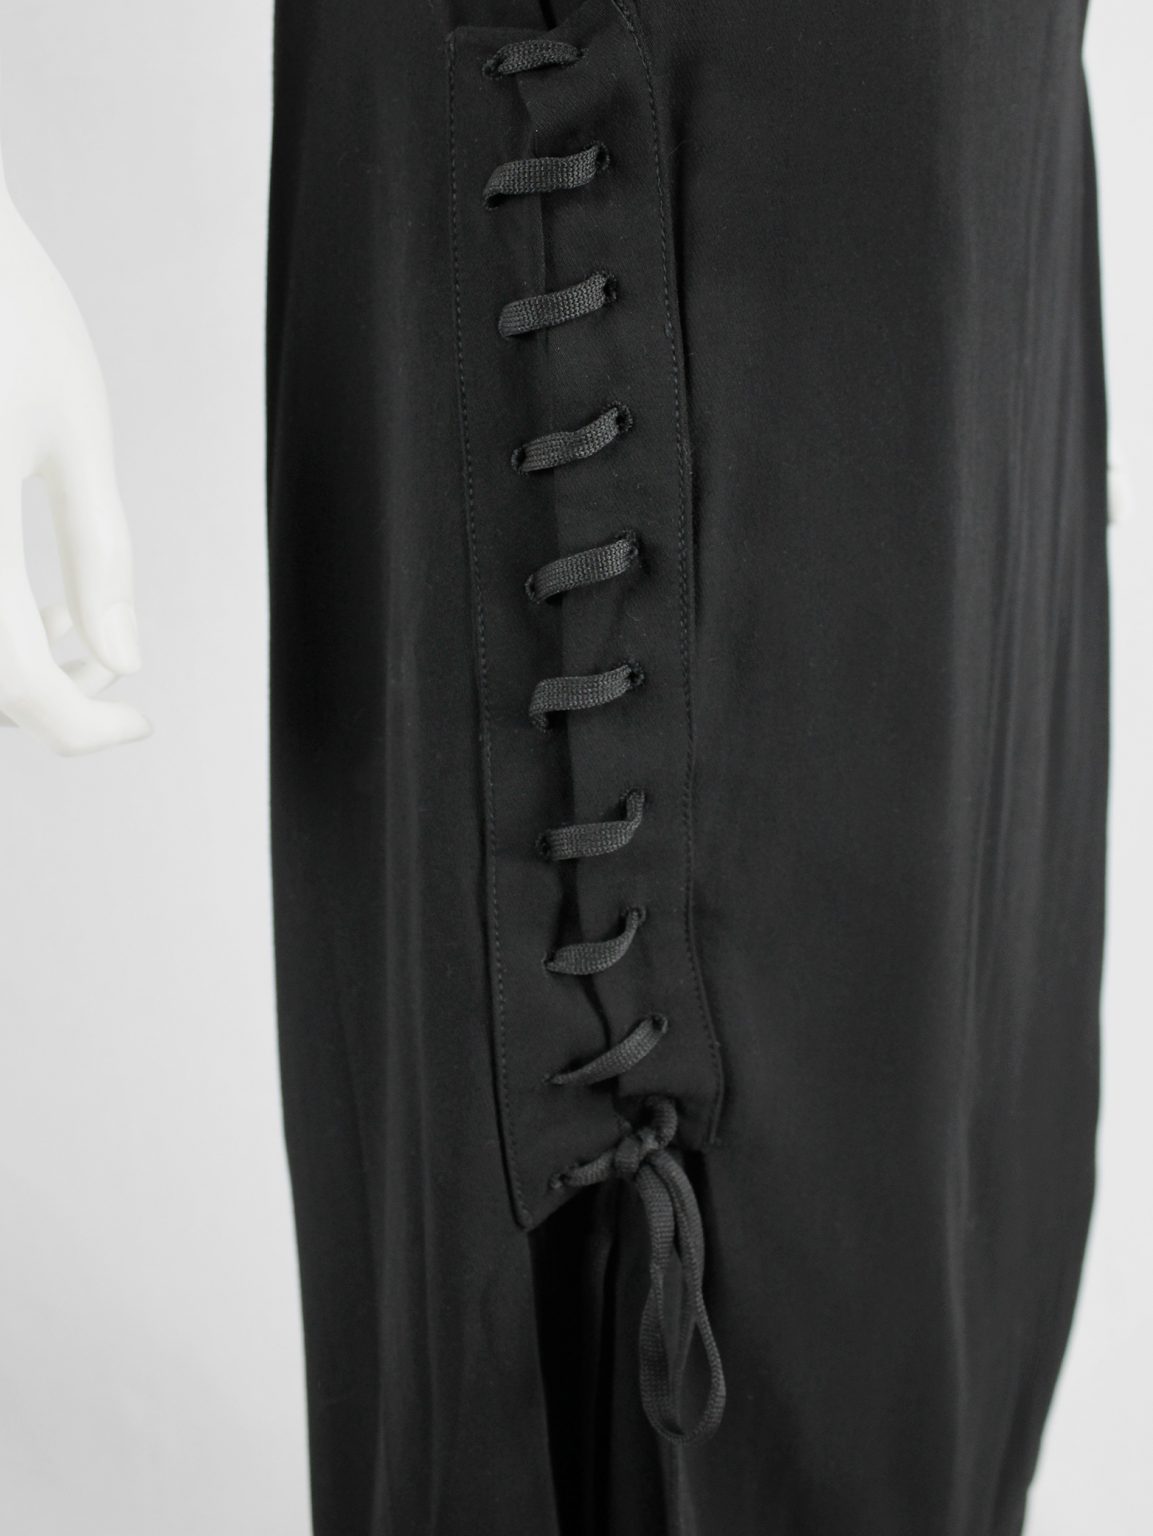 A.F. Vandevorst black skirt with corset-lacing on the side — fall 2006